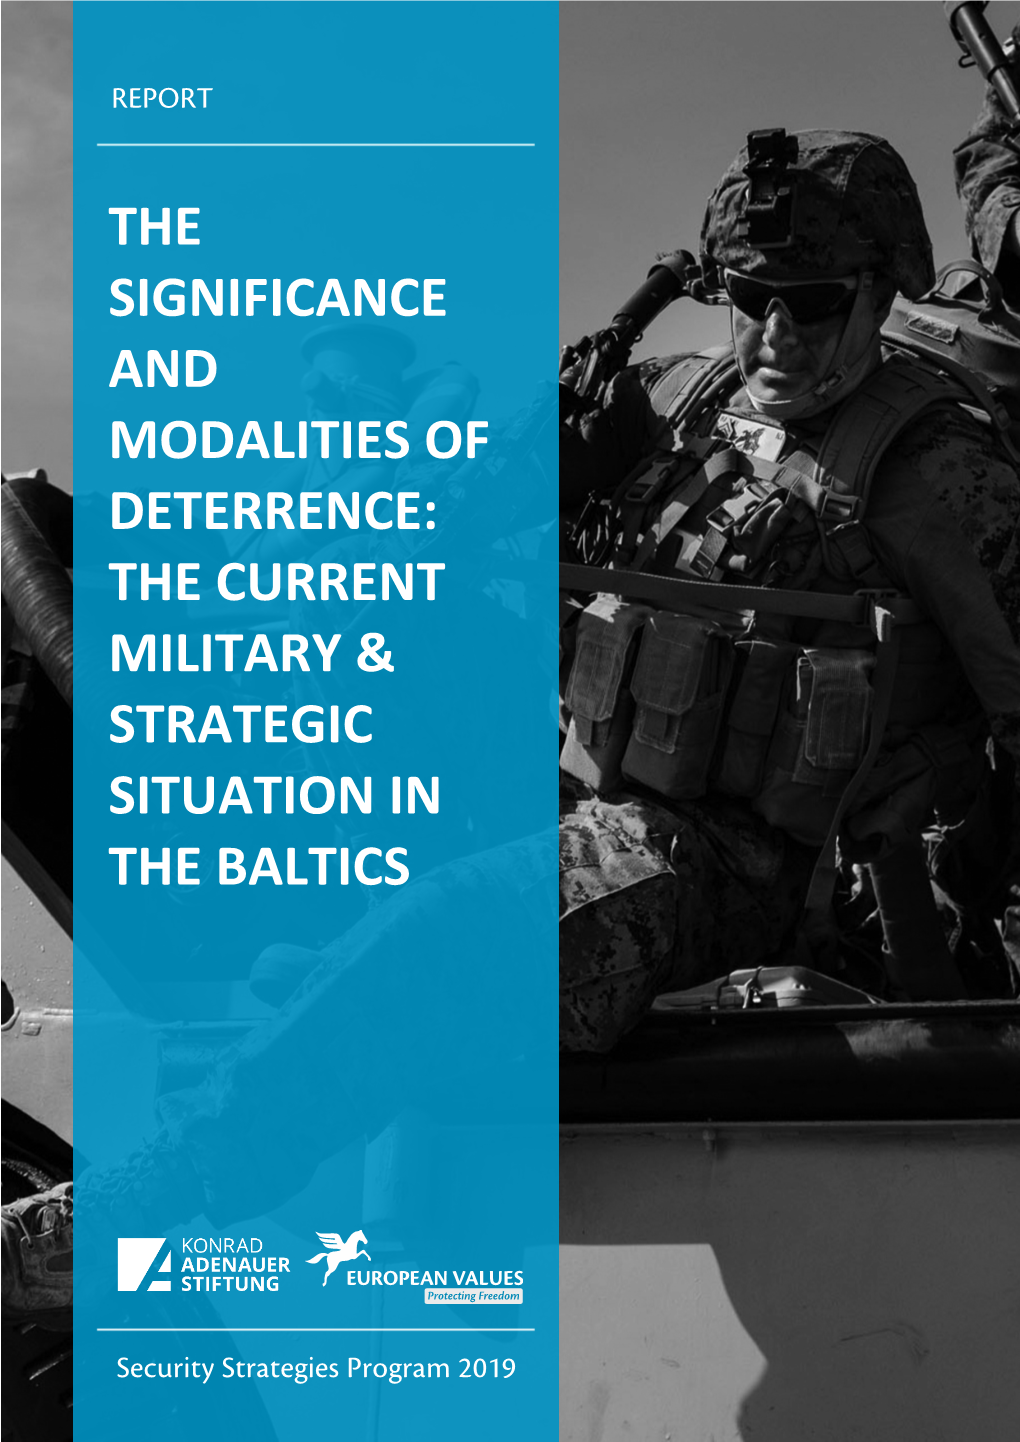 The Significance and Modalities of Deterrence: the Current Military & Strategic Situation in the Baltics